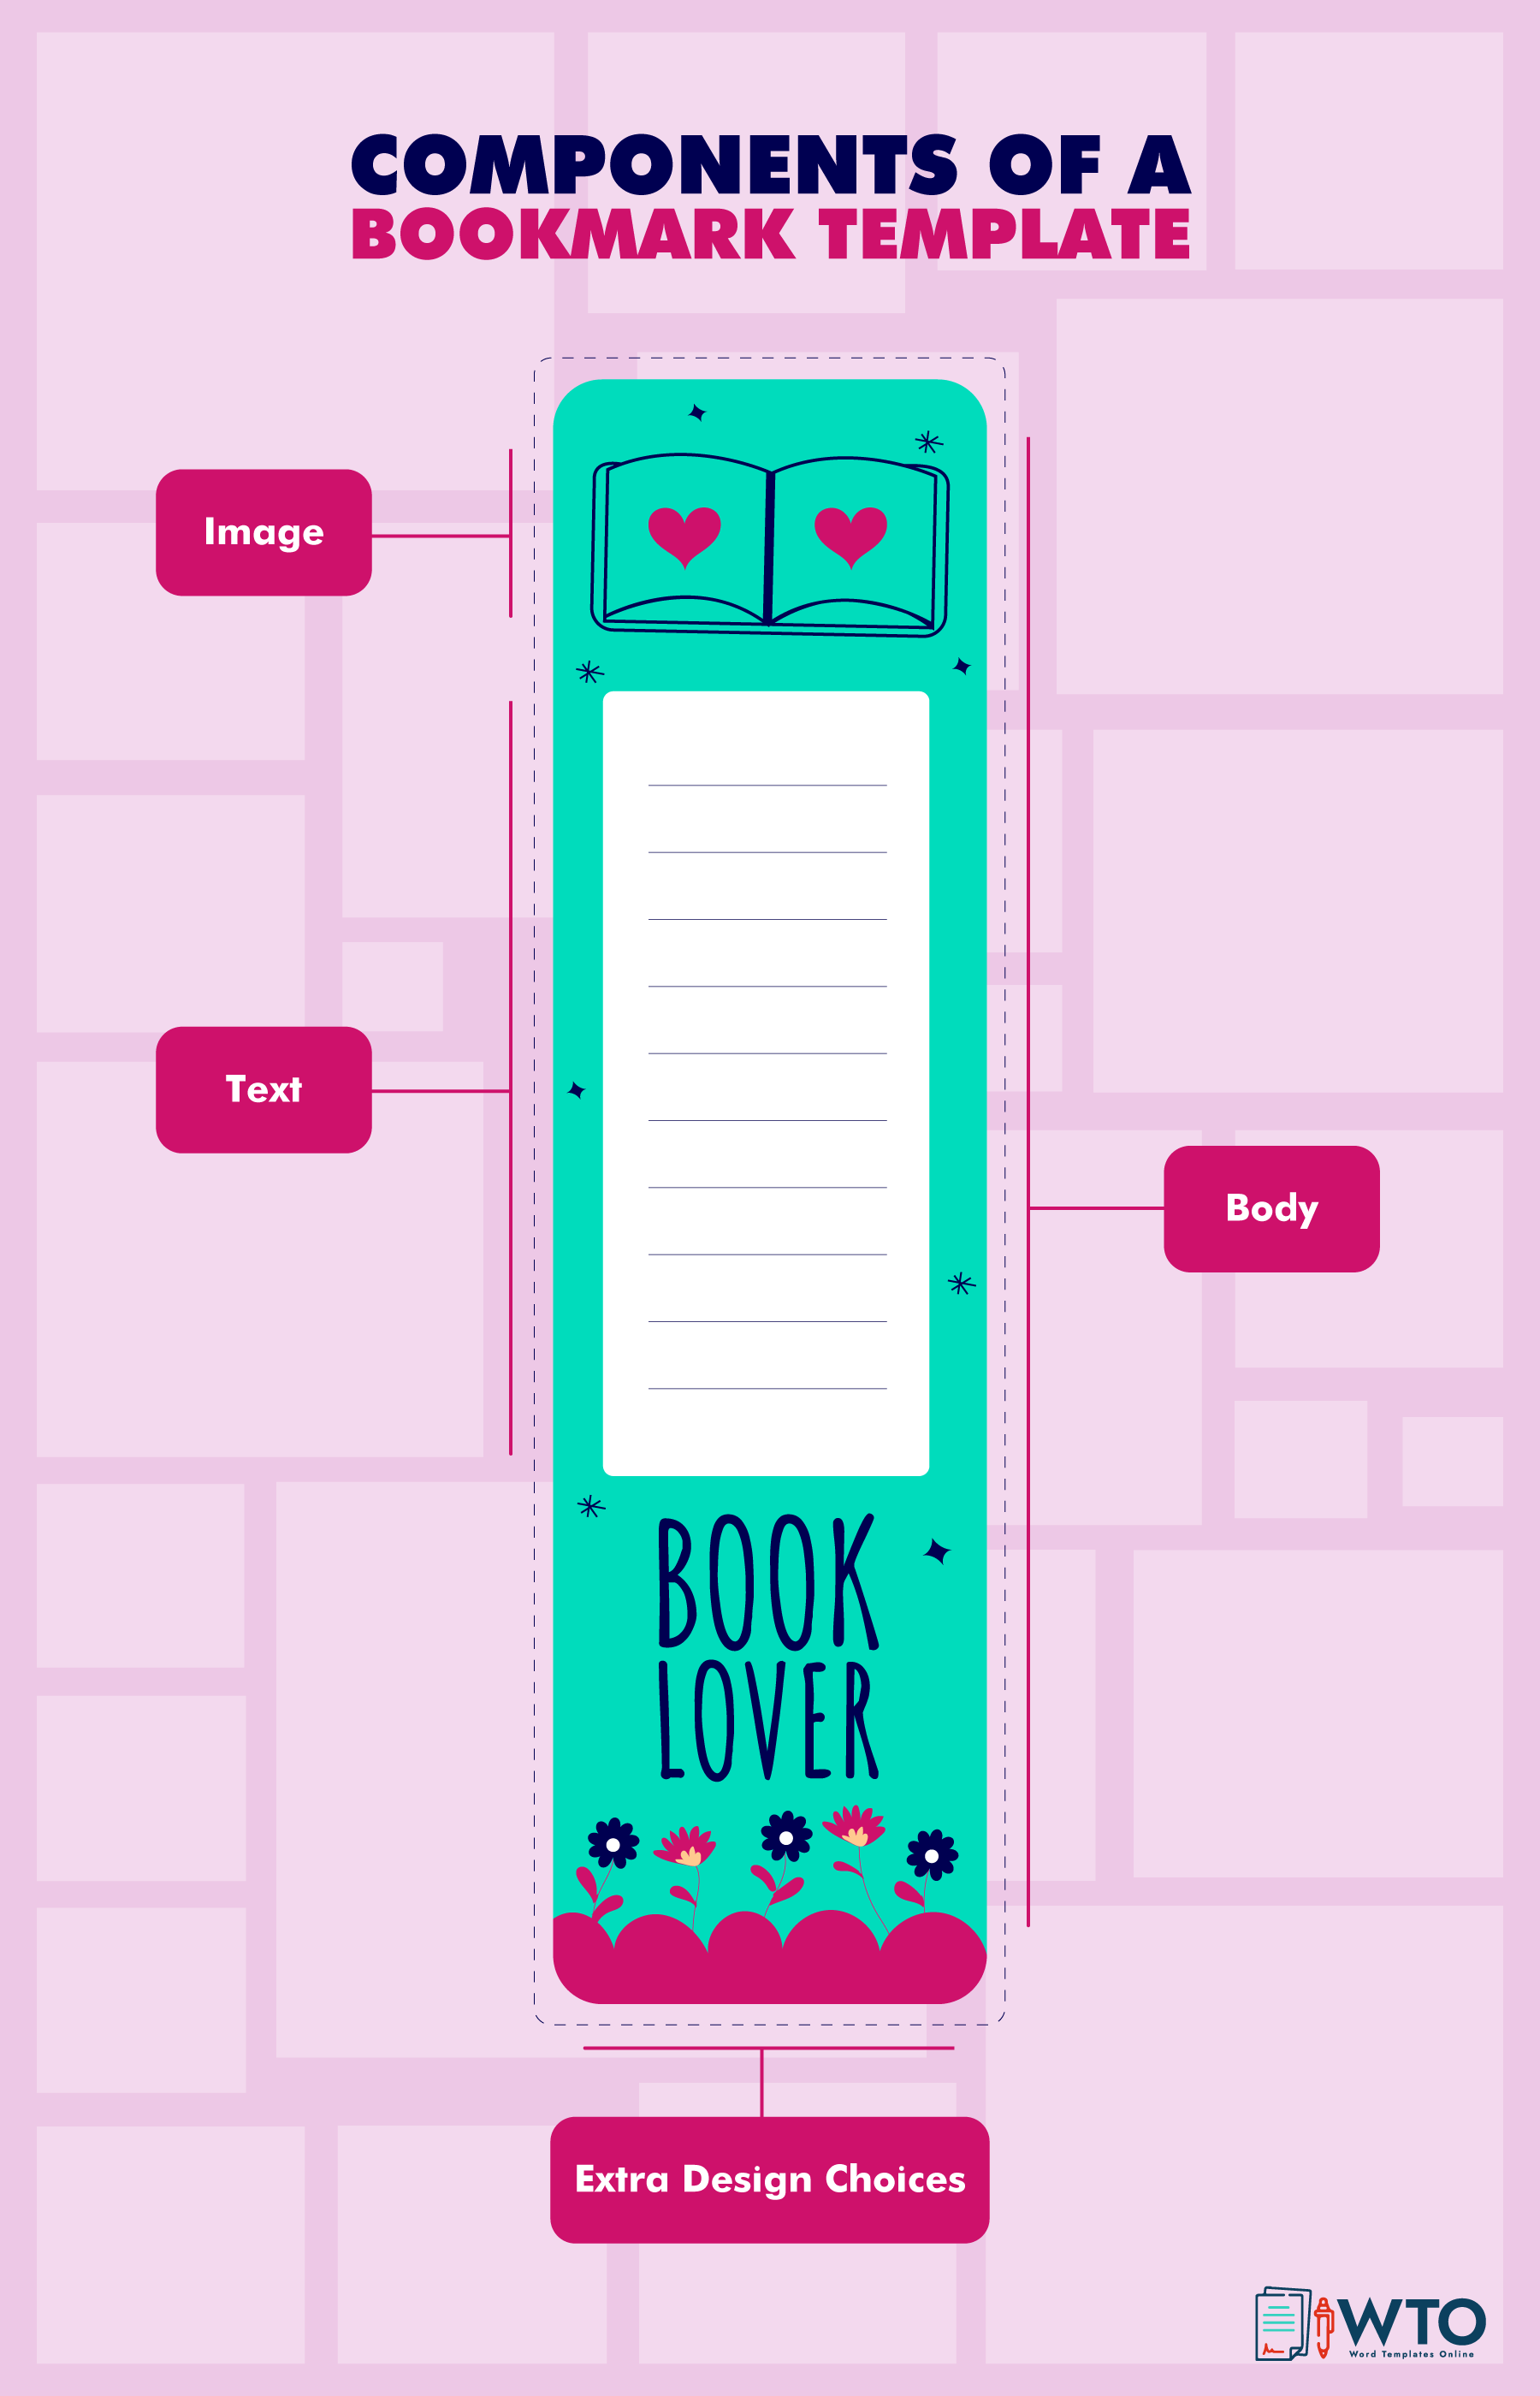 This infographic is about bookmark template components.